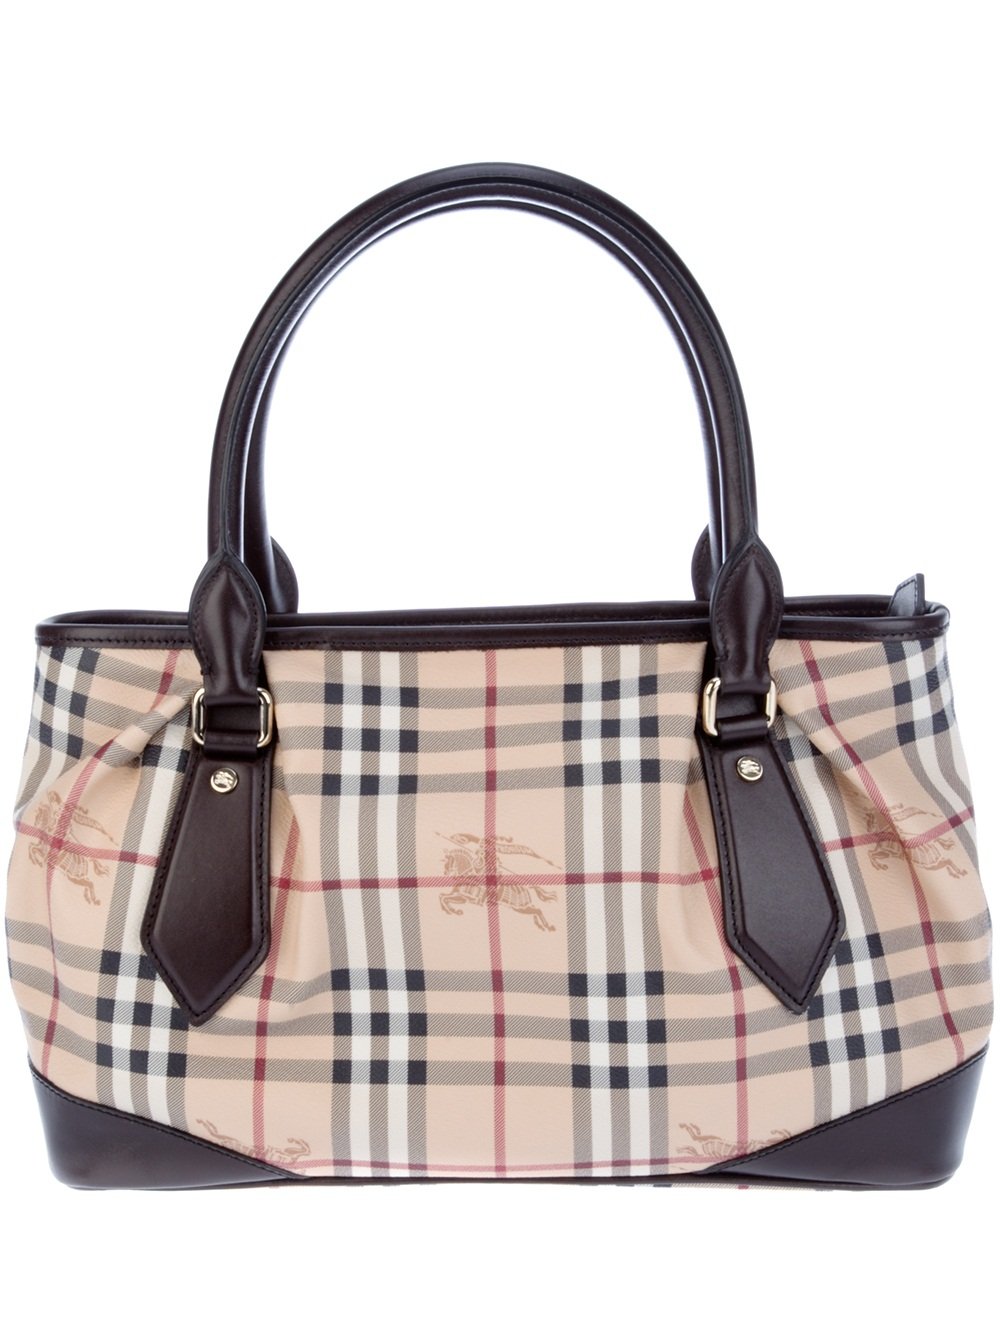 Burberry Tote Bag in Brown (Natural) - Lyst